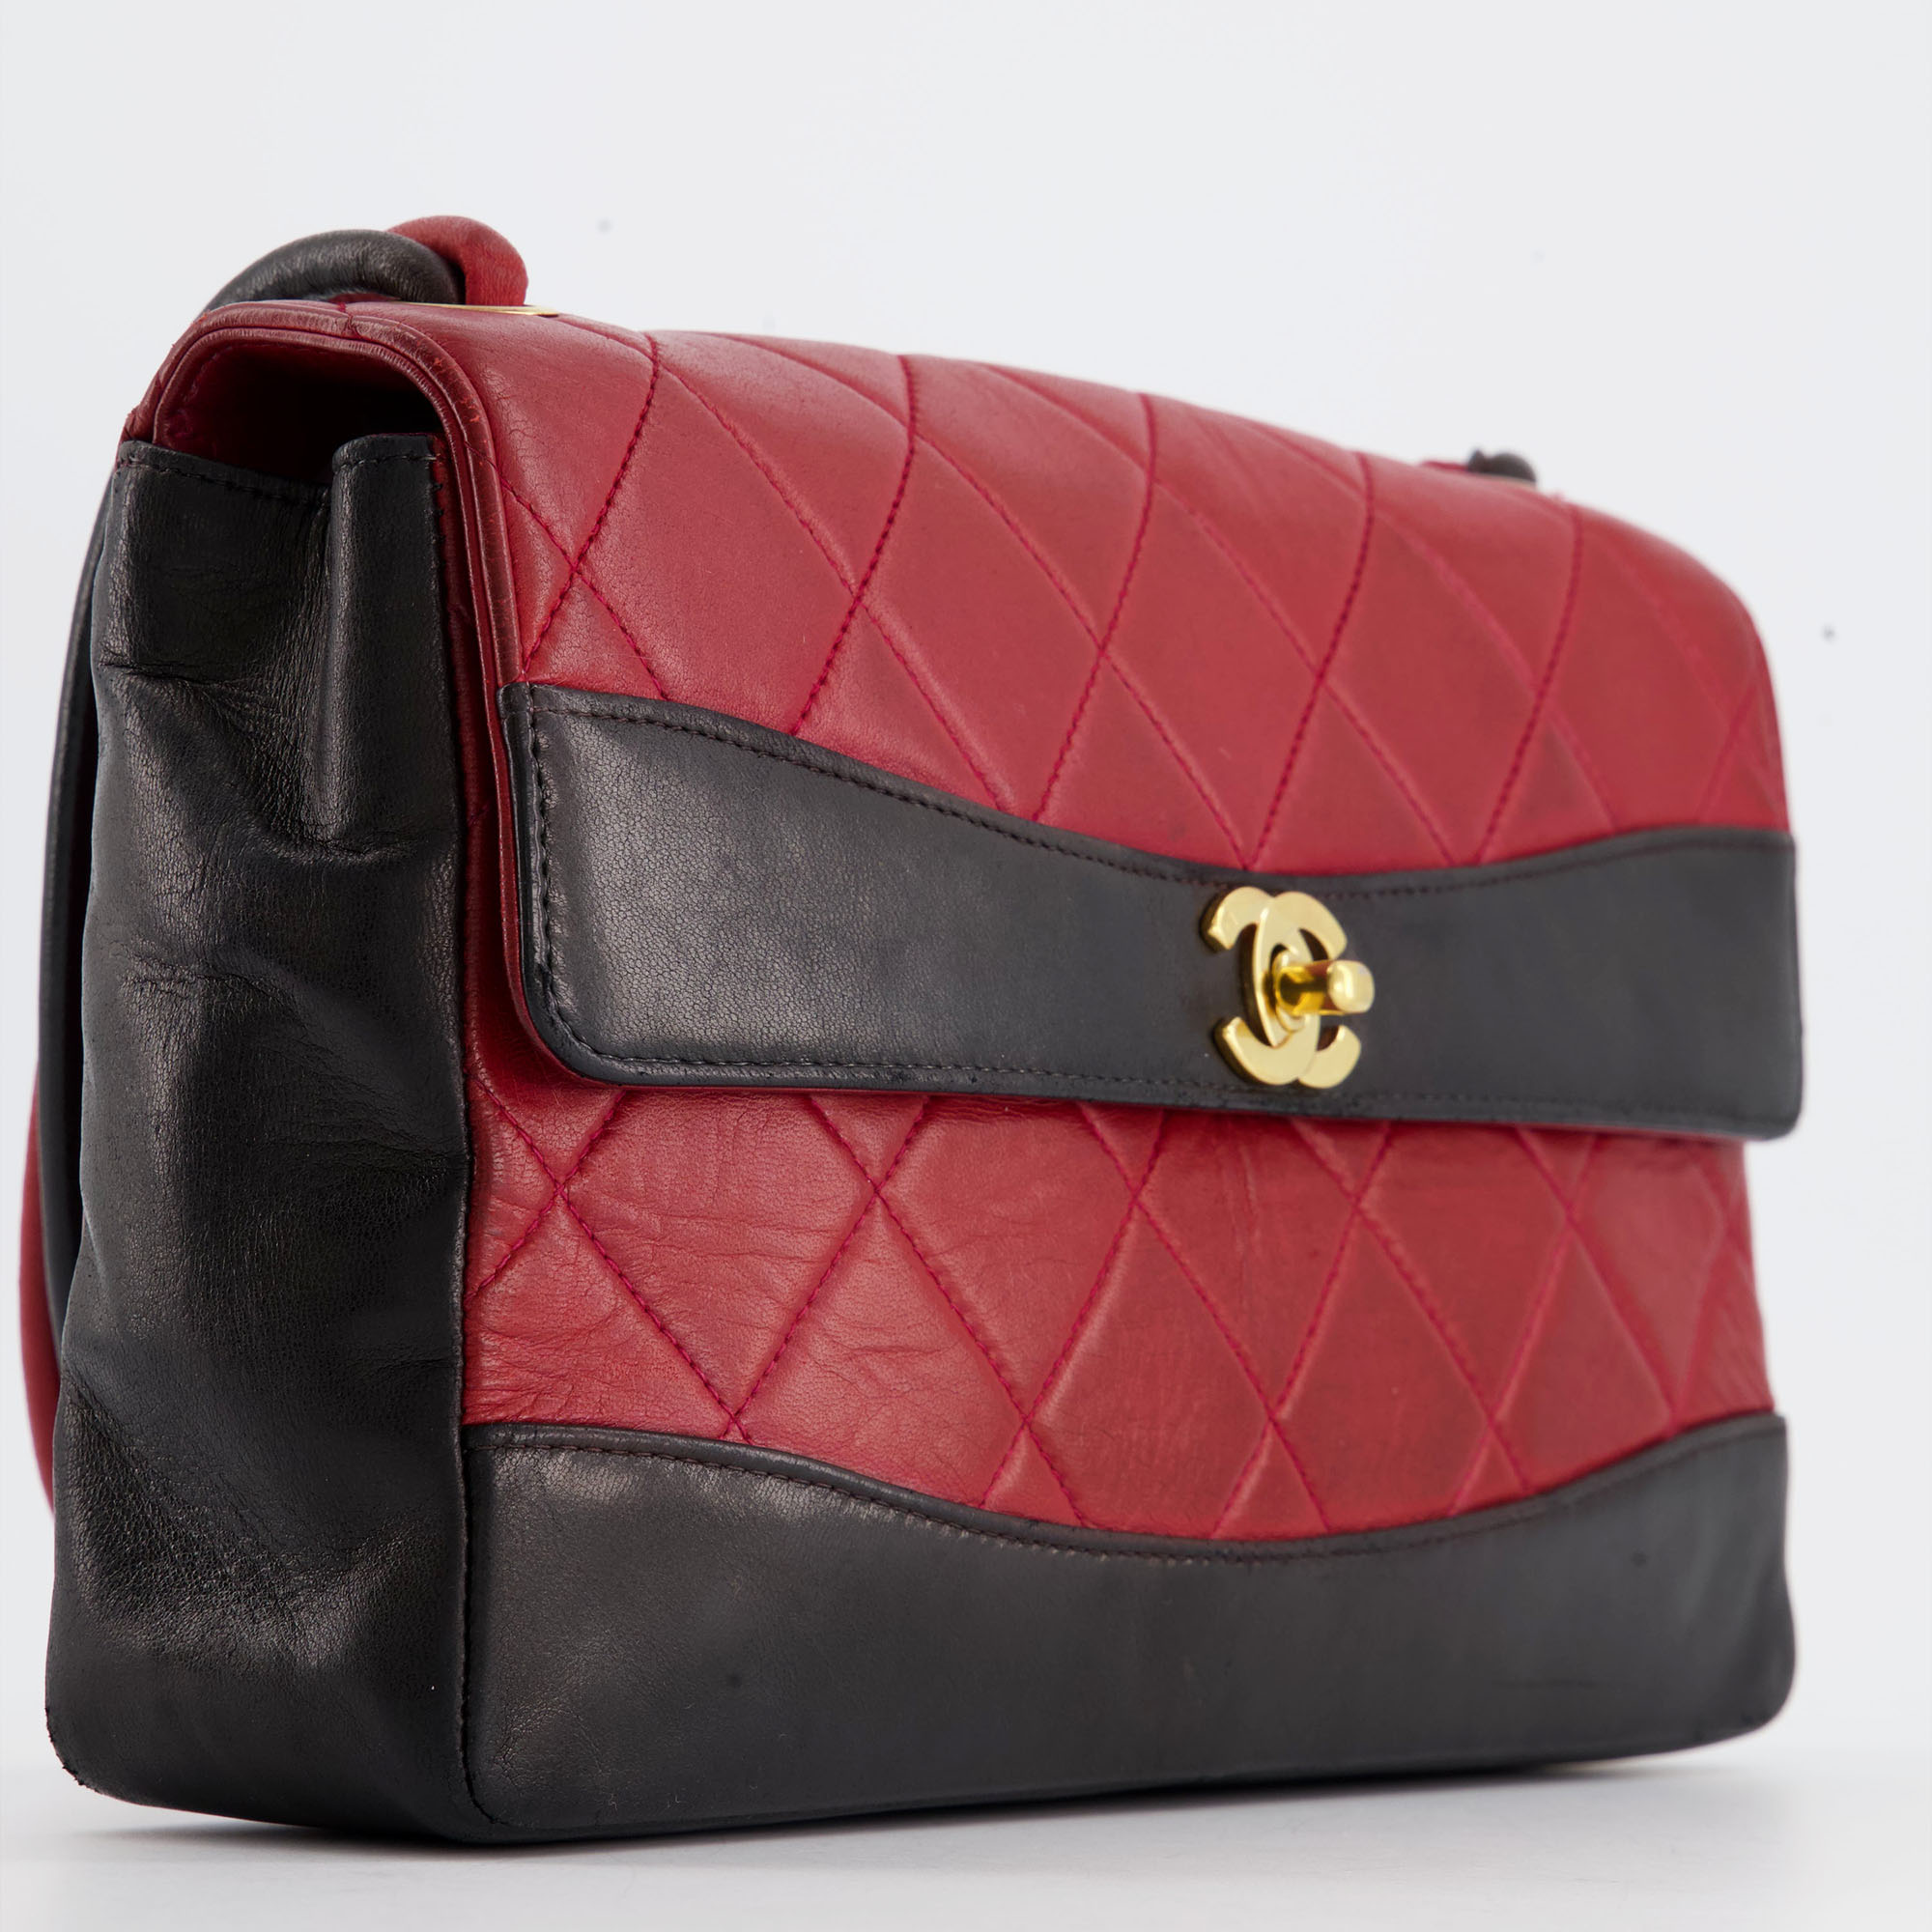 Chanel Vintage Black And Red Lambskin Border Single Flap Bag With Knot Handle & 24k Gold Hardware